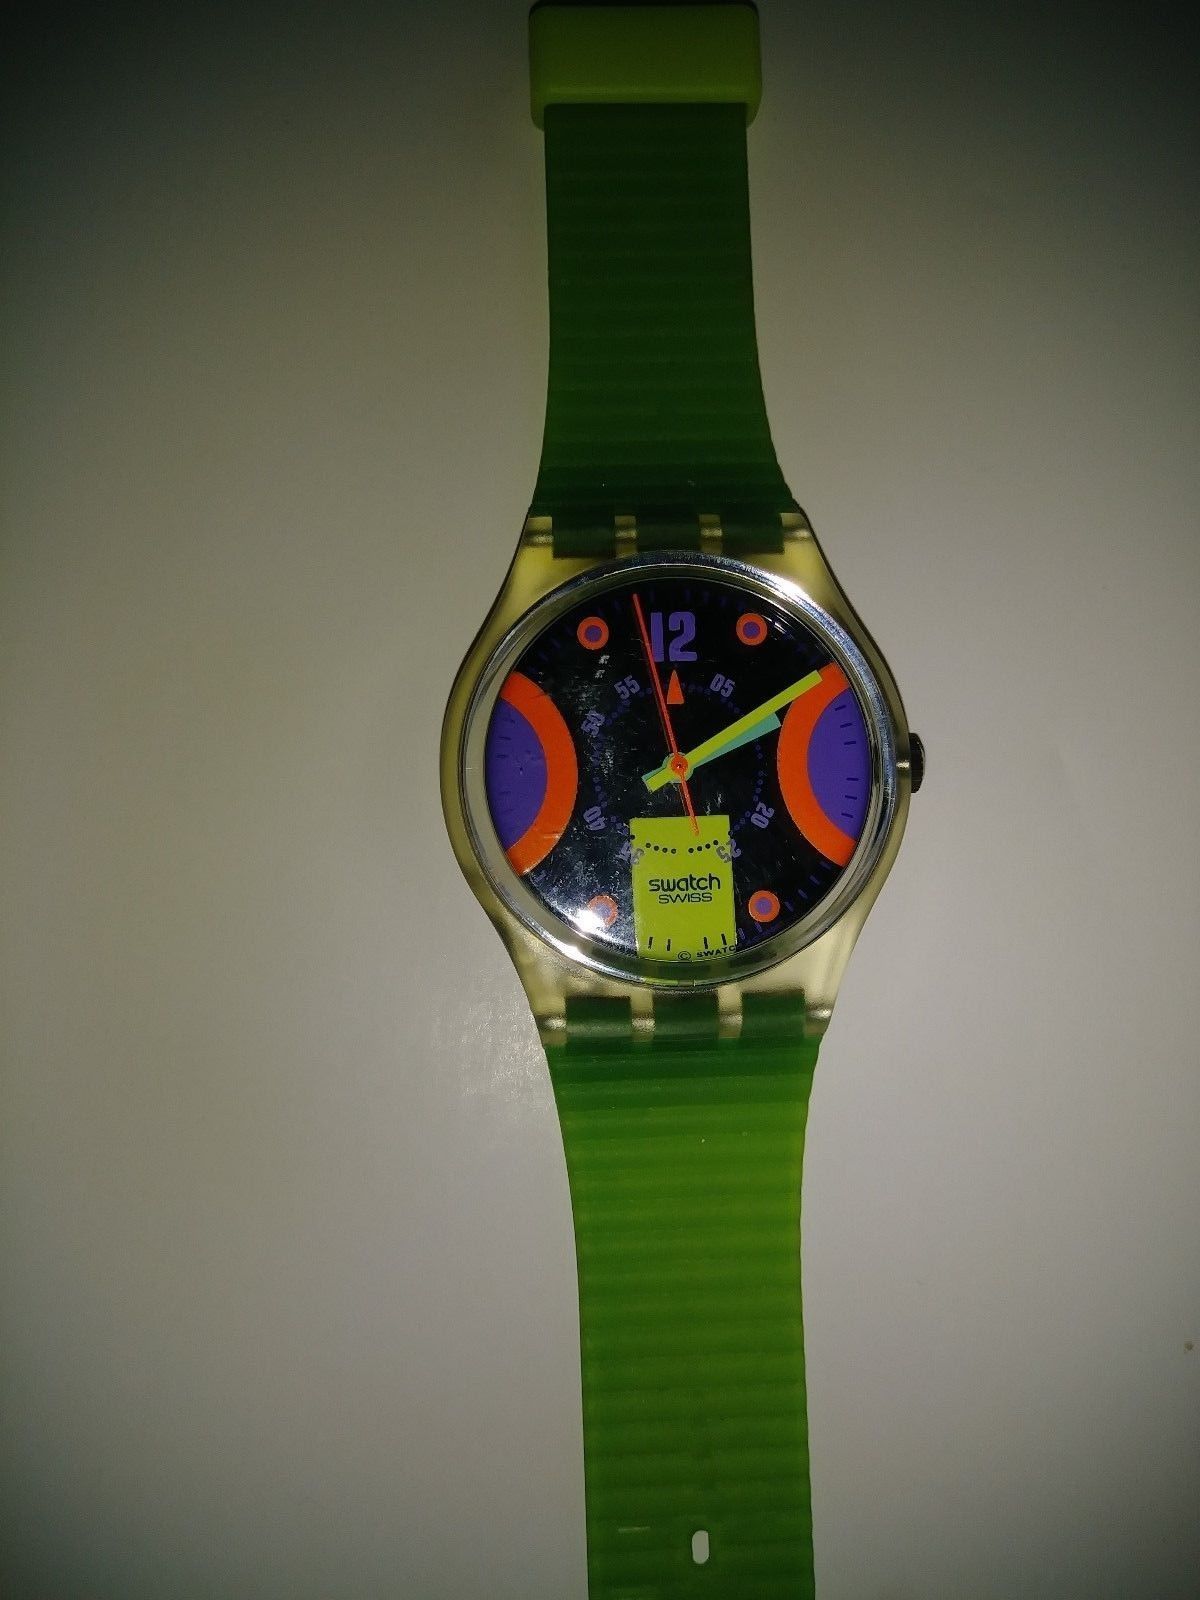 13 Swatch Watches Everyone Was Tick-Tocking About In The 80s